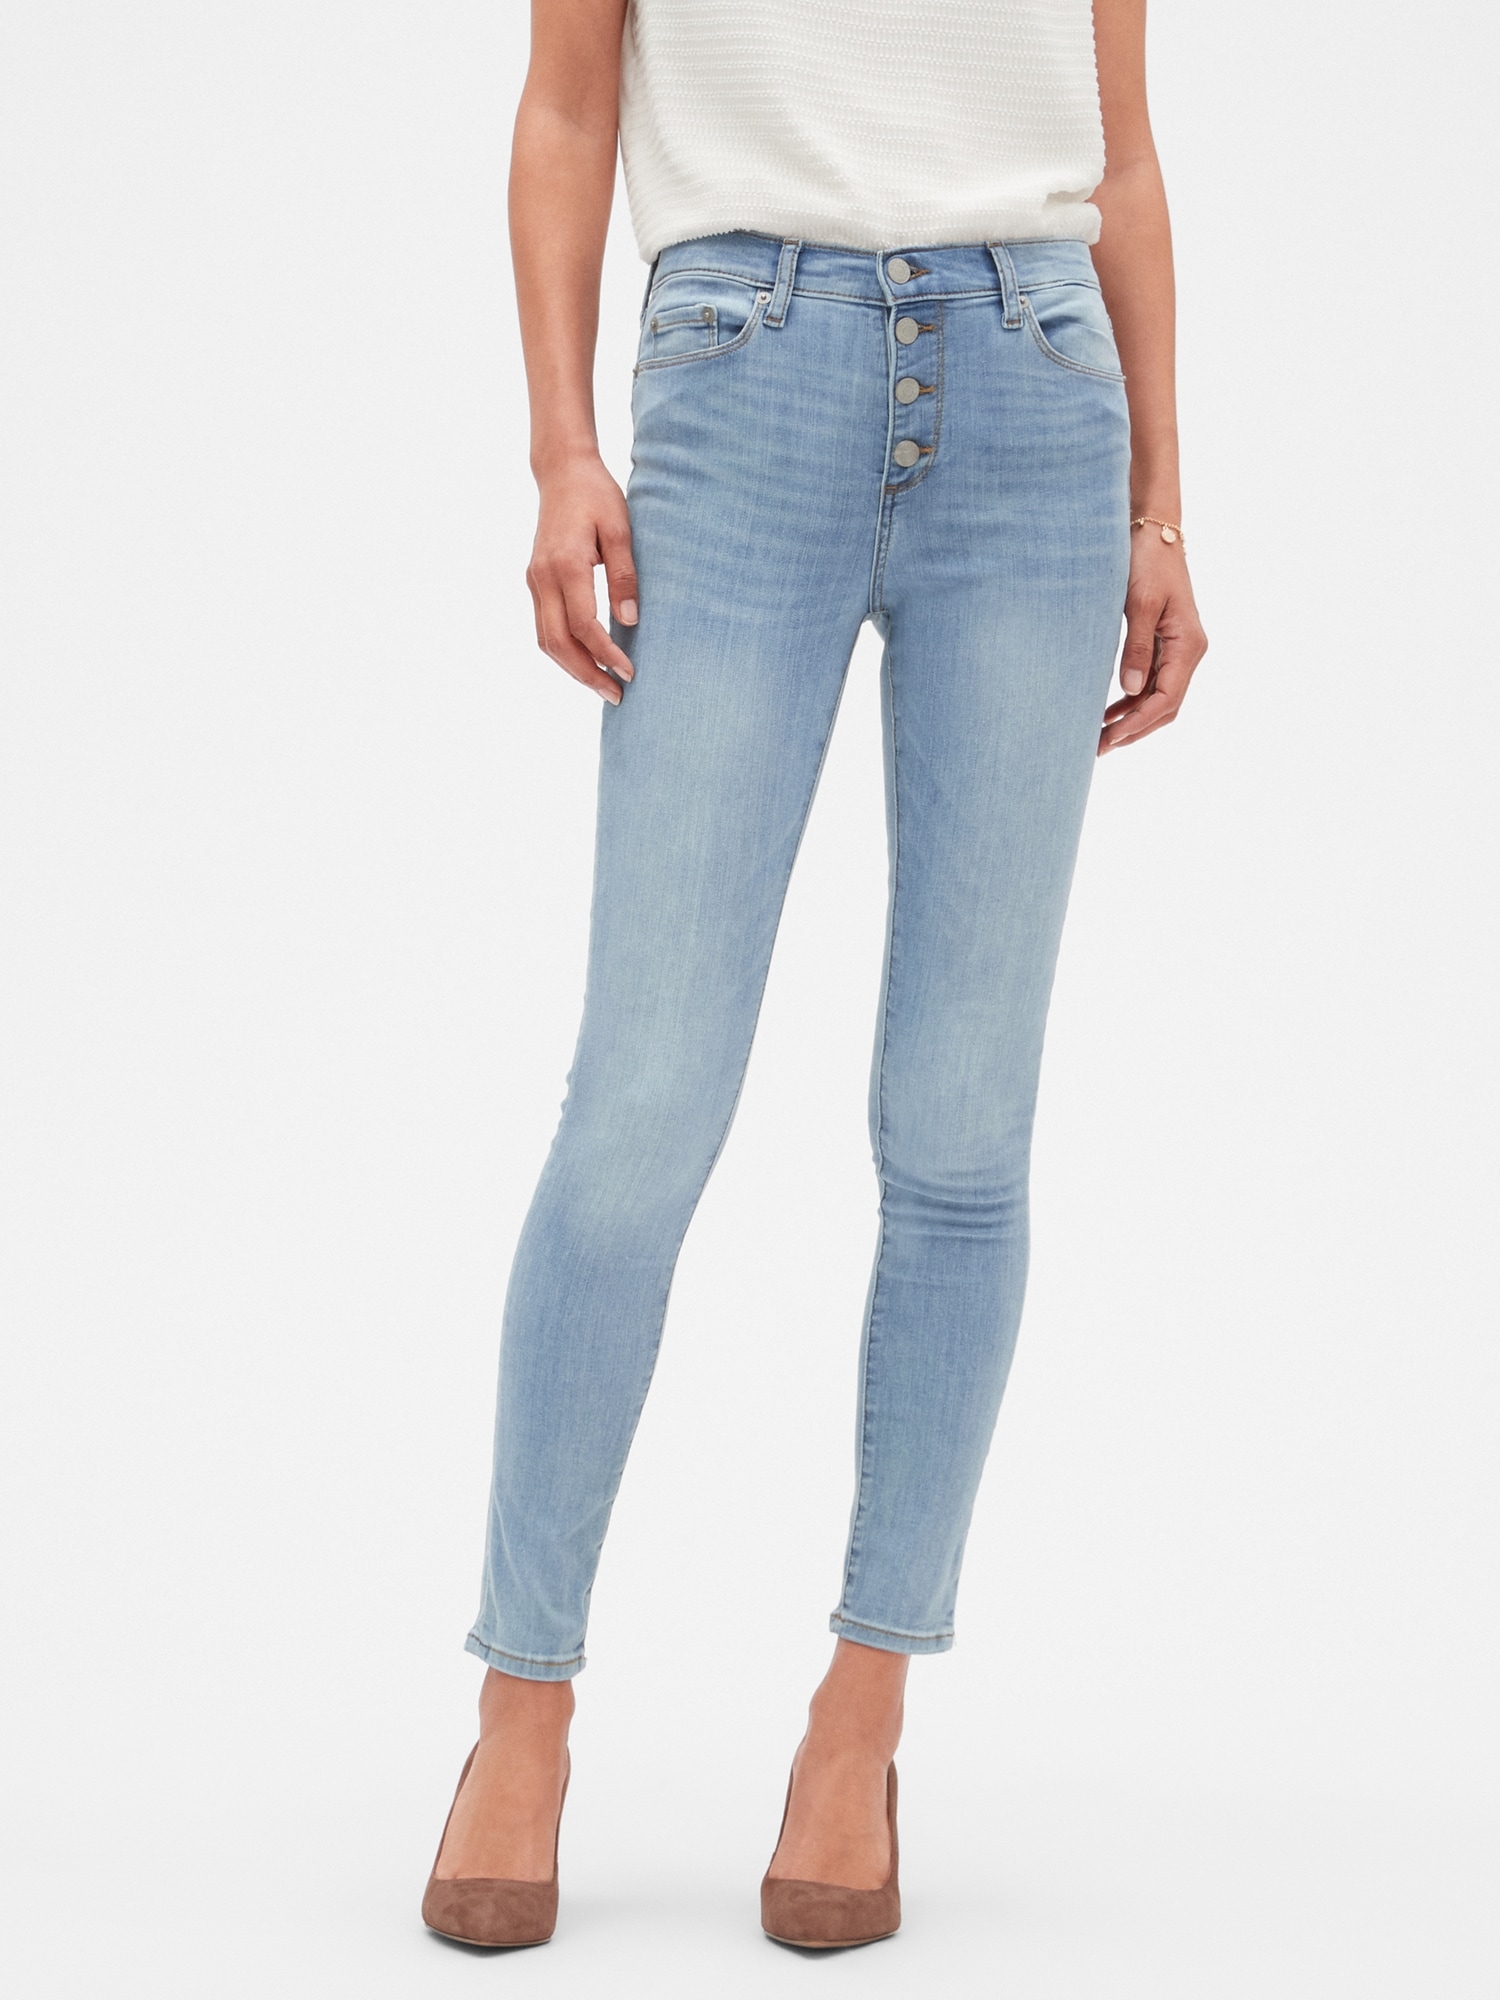 Sculpt High-Rise Button Front Light Wash Skinny Jean